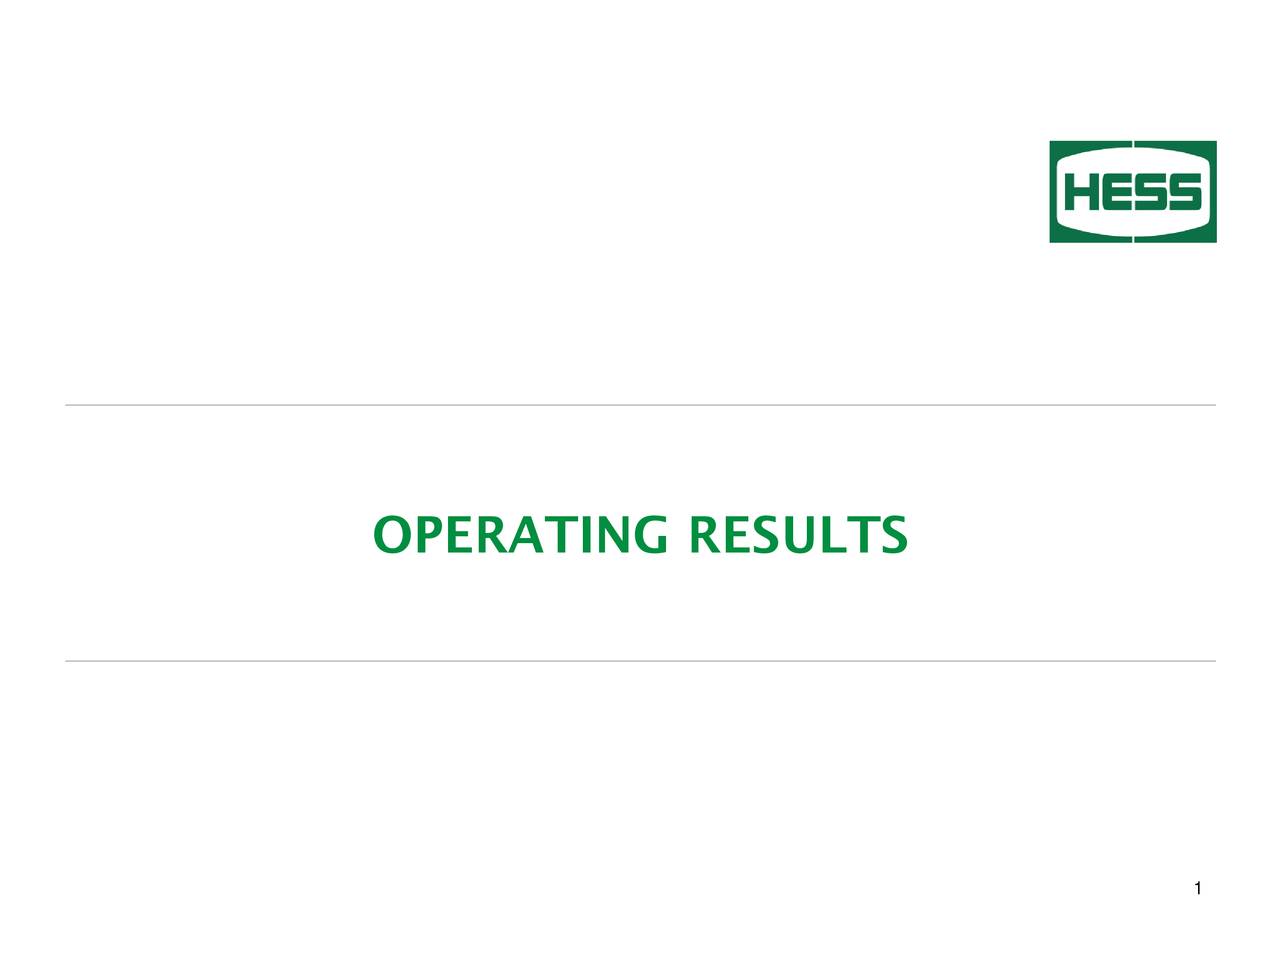 OPERATING RESULTS